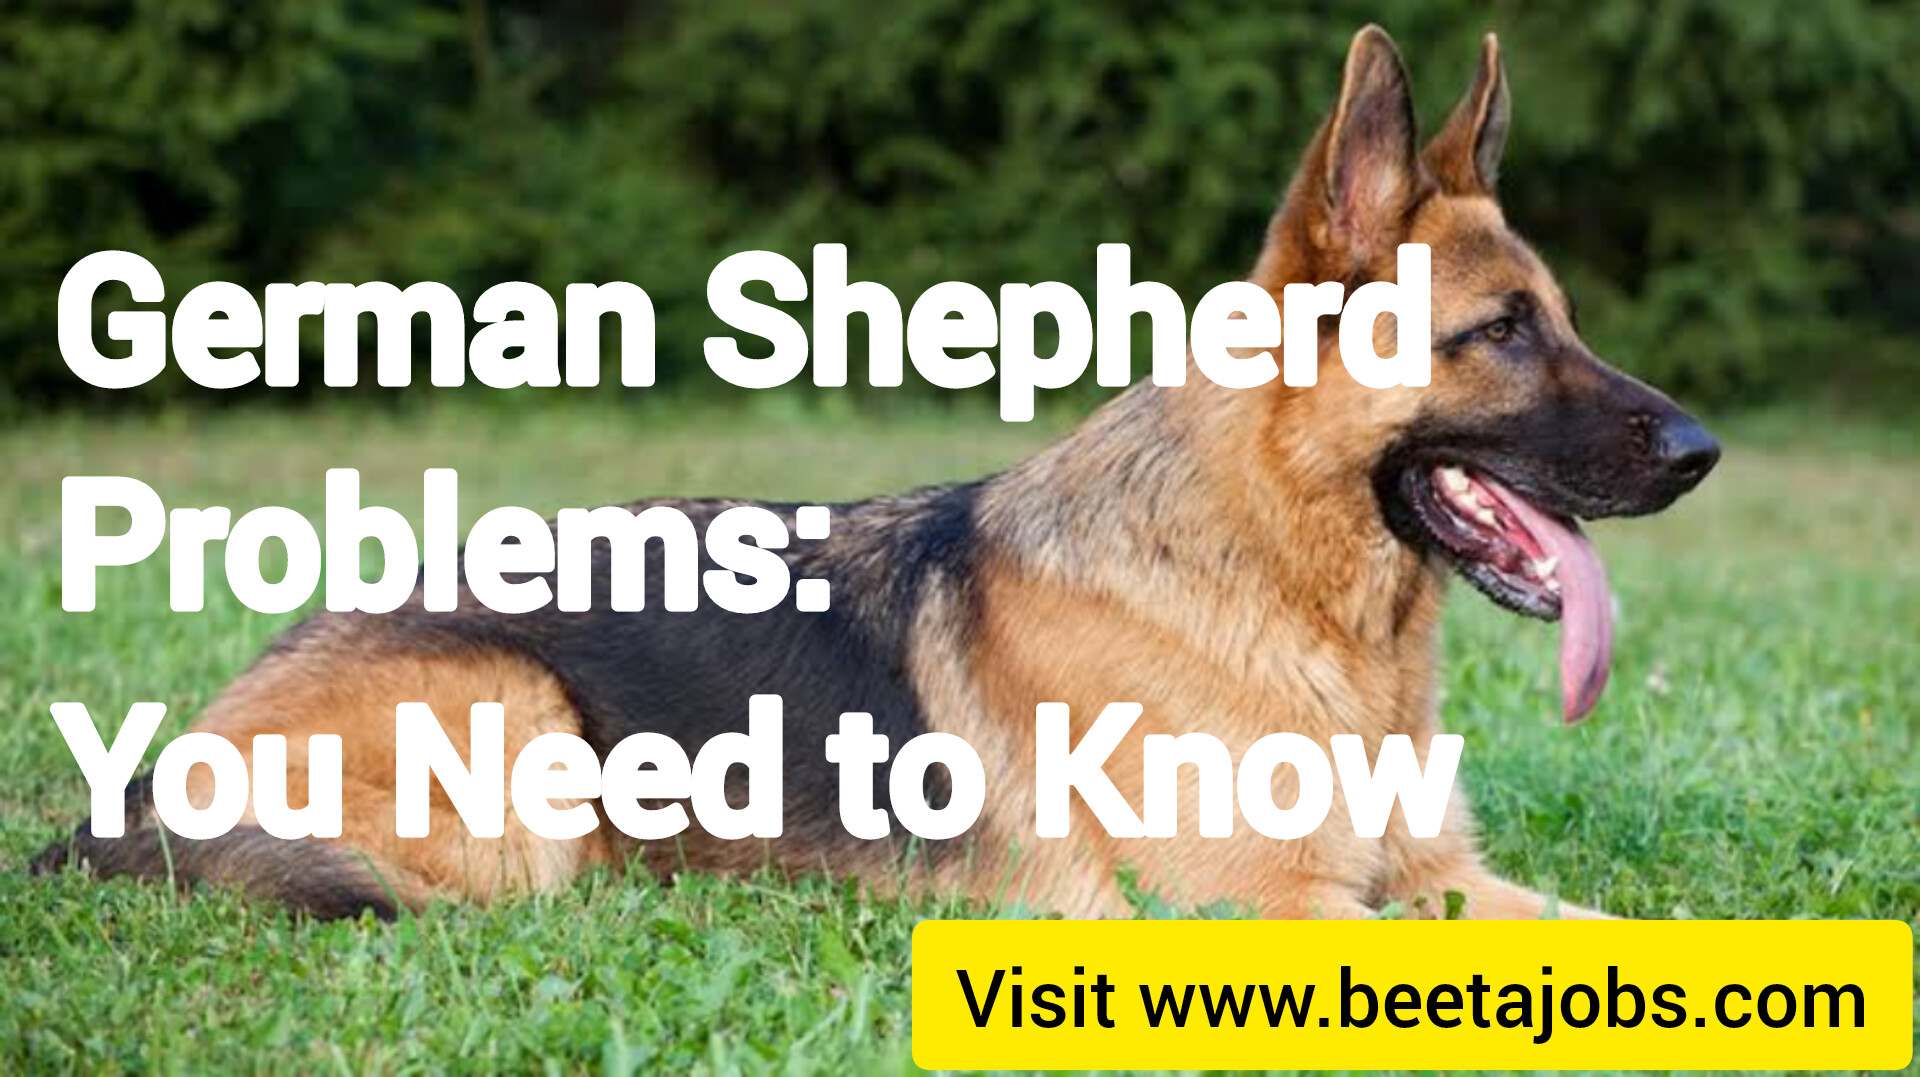 German Shepherd Problems: You Need to Know